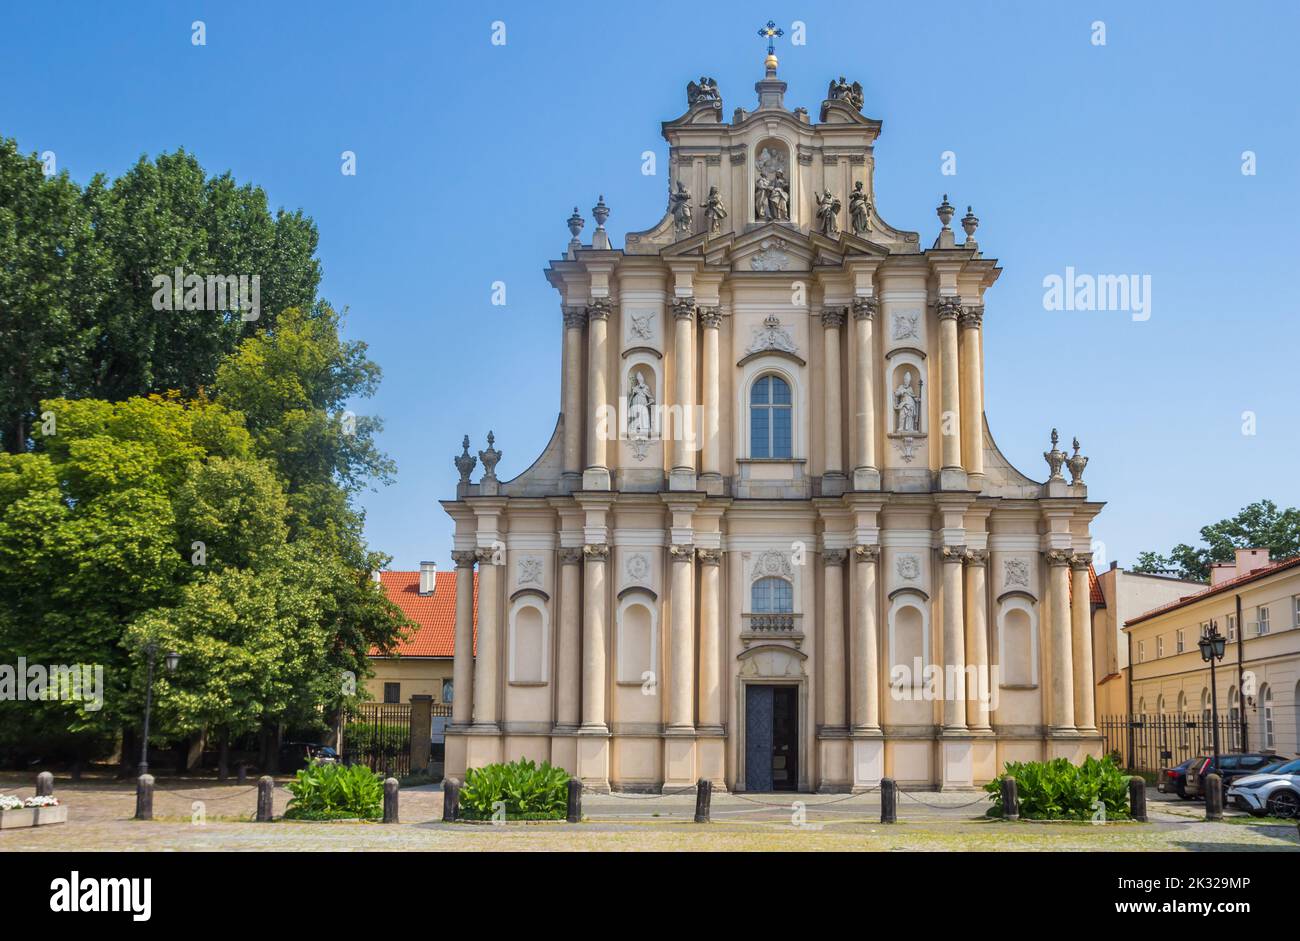 Historic visitationist church in the center of Warsaw, Poland Stock Photo